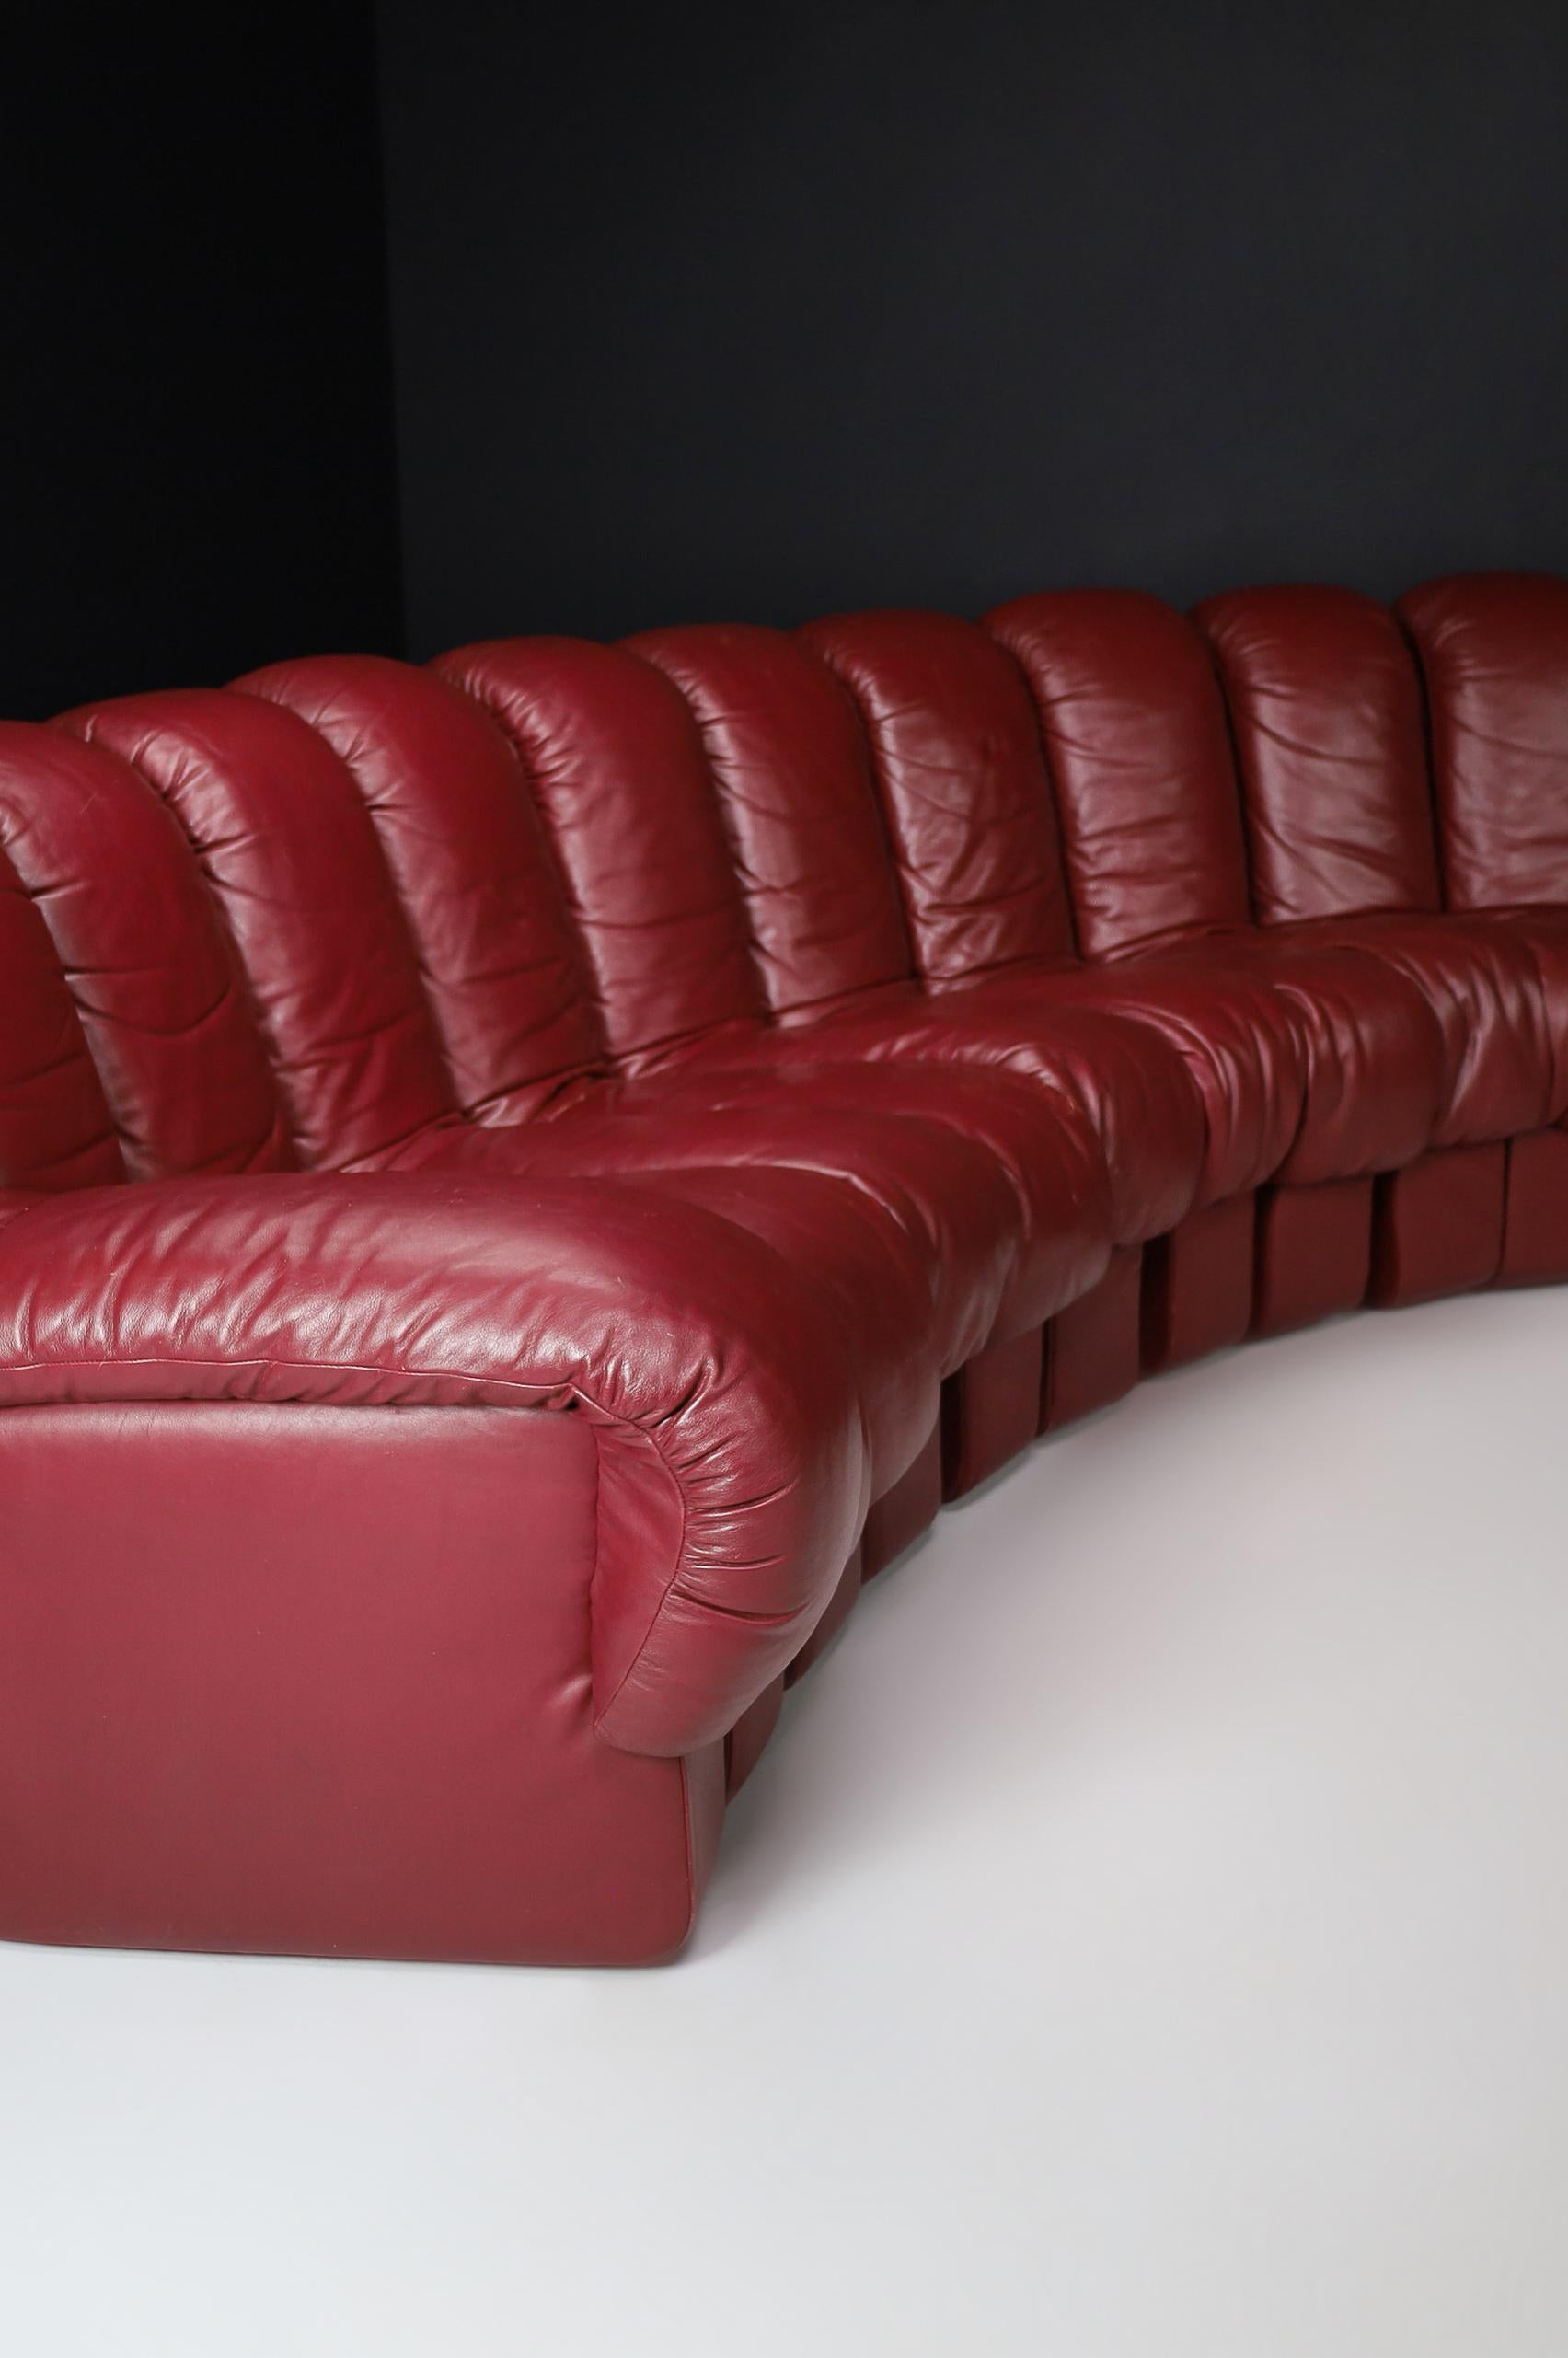 20th Century De Sede DS-600 'Snake' Sectional Sofa in Full Bordeaux Leather by Ueli Berger.